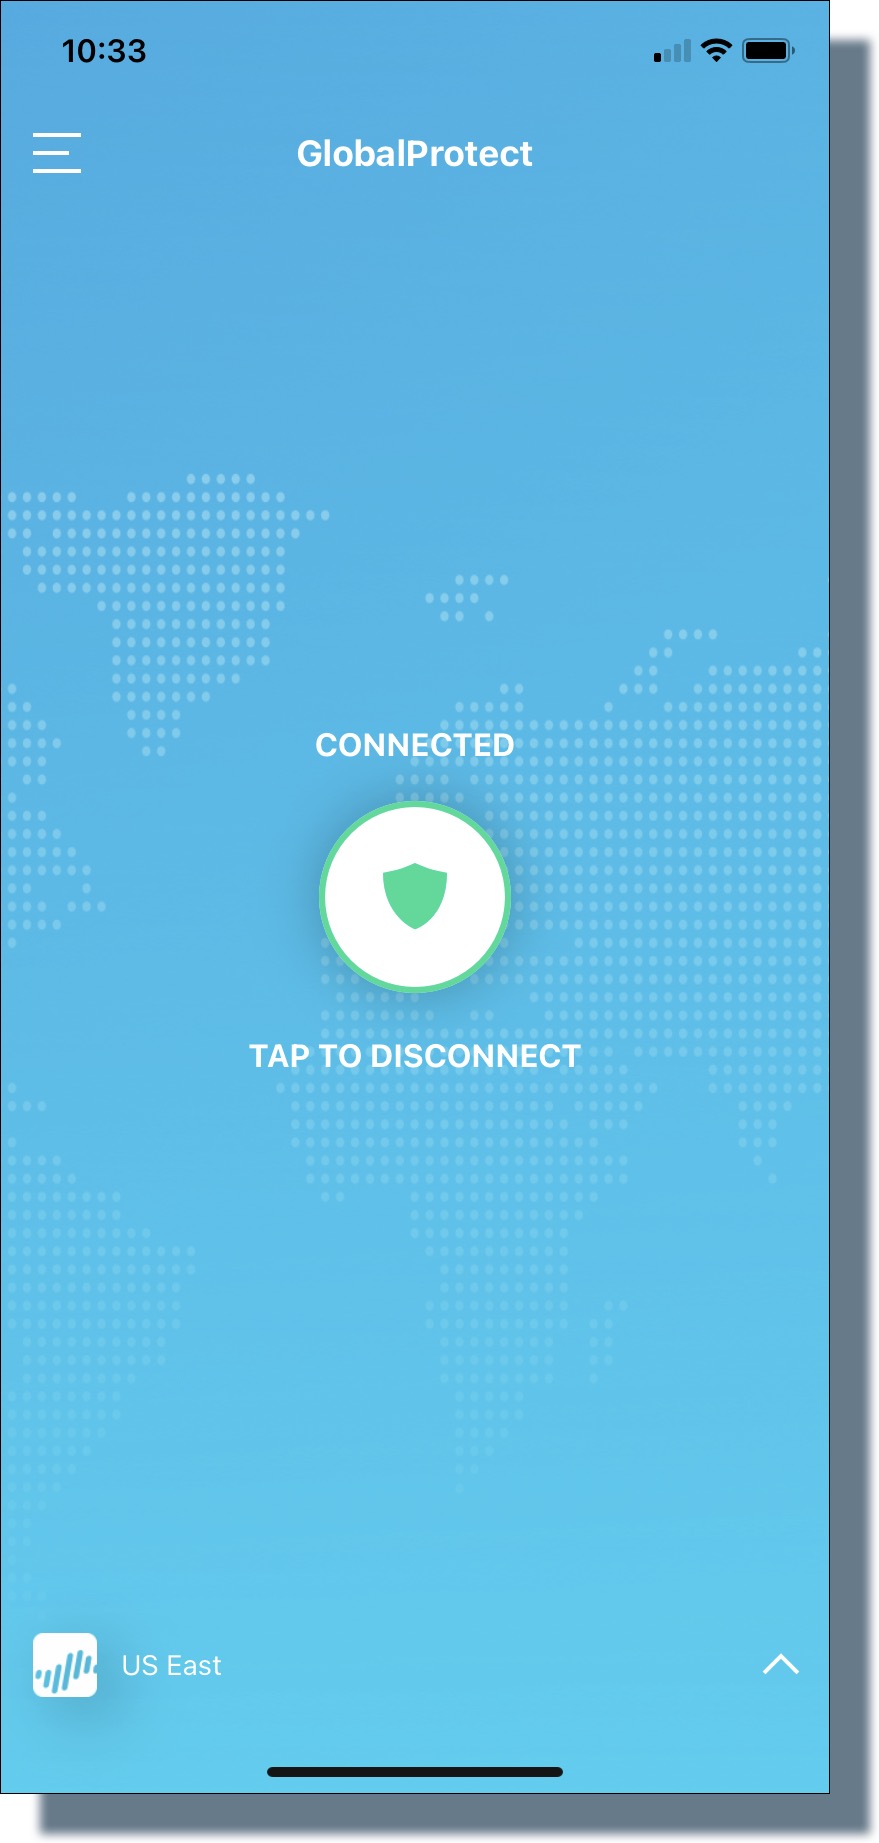 Confirmation message in VPN app that you're now connected to the VPN.